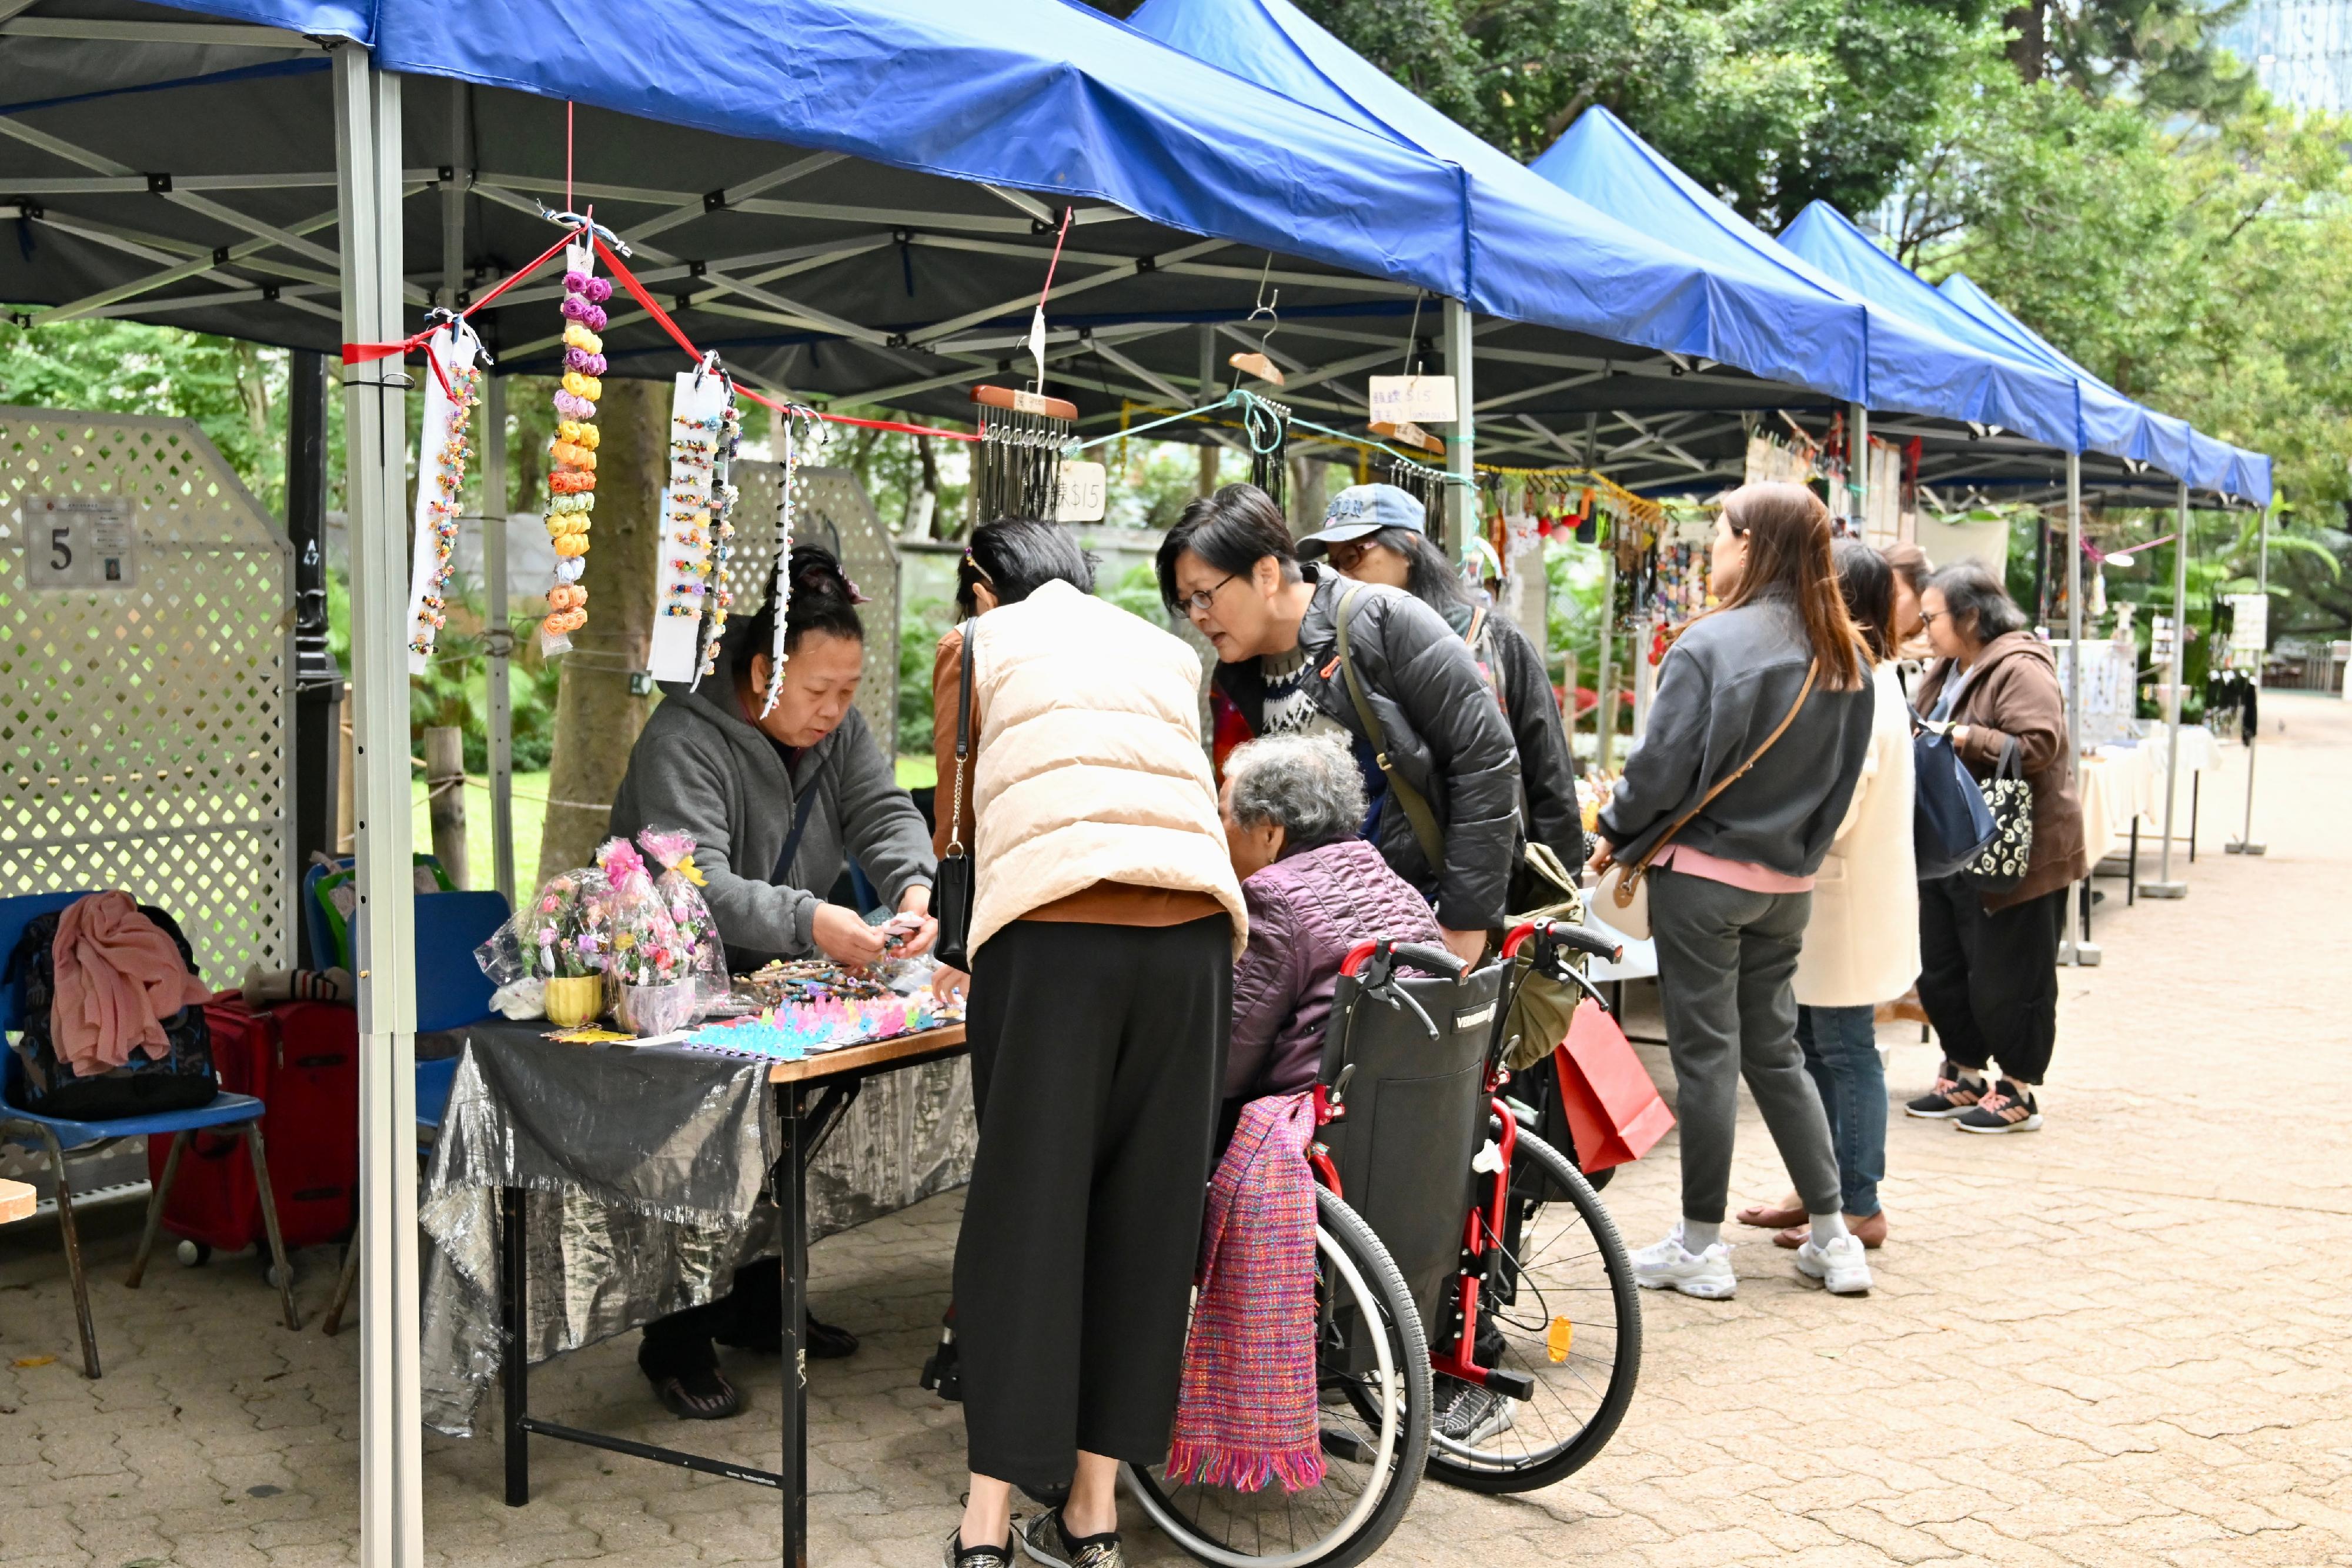 The Leisure and Cultural Services Department invites members of the public to visit the Arts Corner at Hong Kong Park on Saturdays, Sundays and public holidays from January 1 to December 31, 2024. The Arts Corner comprises 10 stalls displaying and selling various kinds of handicrafts and artistic works such as fabric crafts and ornaments, as well as providing cultural and arts services including painting and portrait sketching.